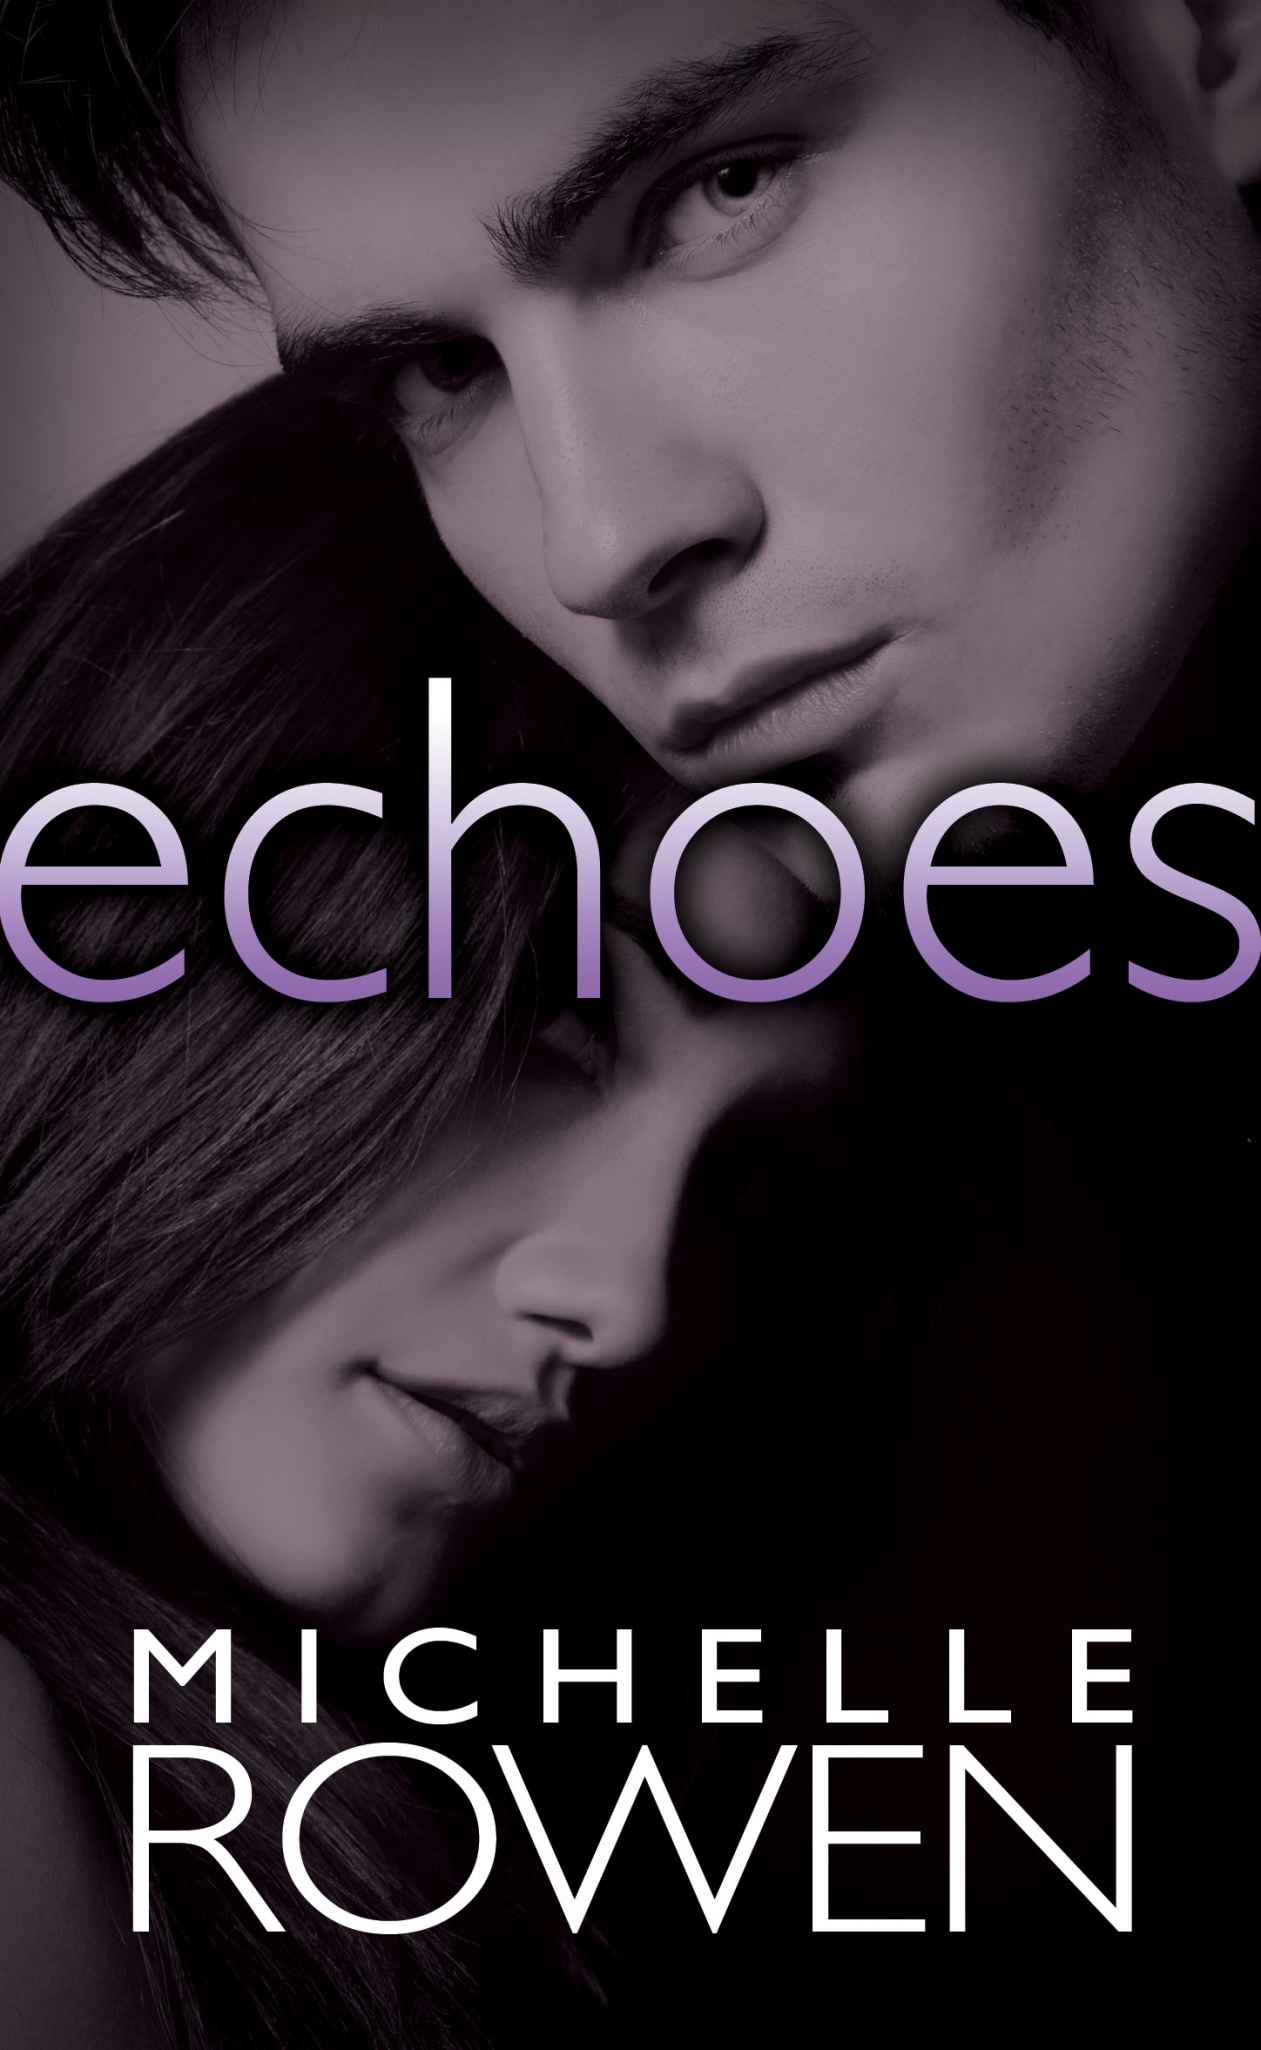 Echoes by Michelle Rowen